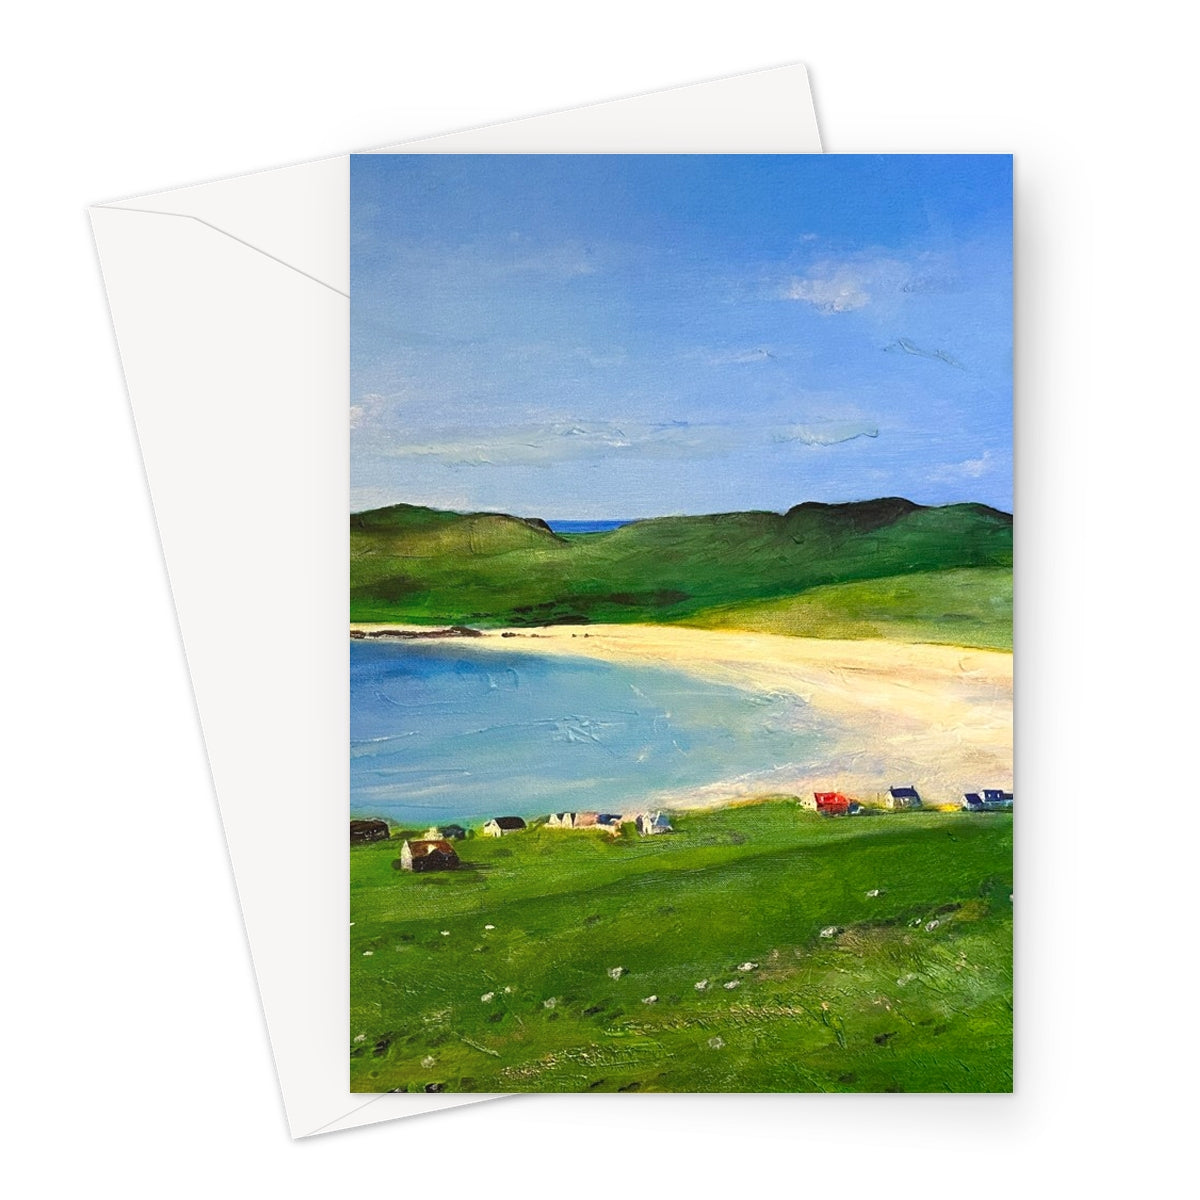 Balephuil Beach Tiree Art Gifts Greeting Card-Greetings Cards-Hebridean Islands Art Gallery-A5 Portrait-1 Card-Paintings, Prints, Homeware, Art Gifts From Scotland By Scottish Artist Kevin Hunter